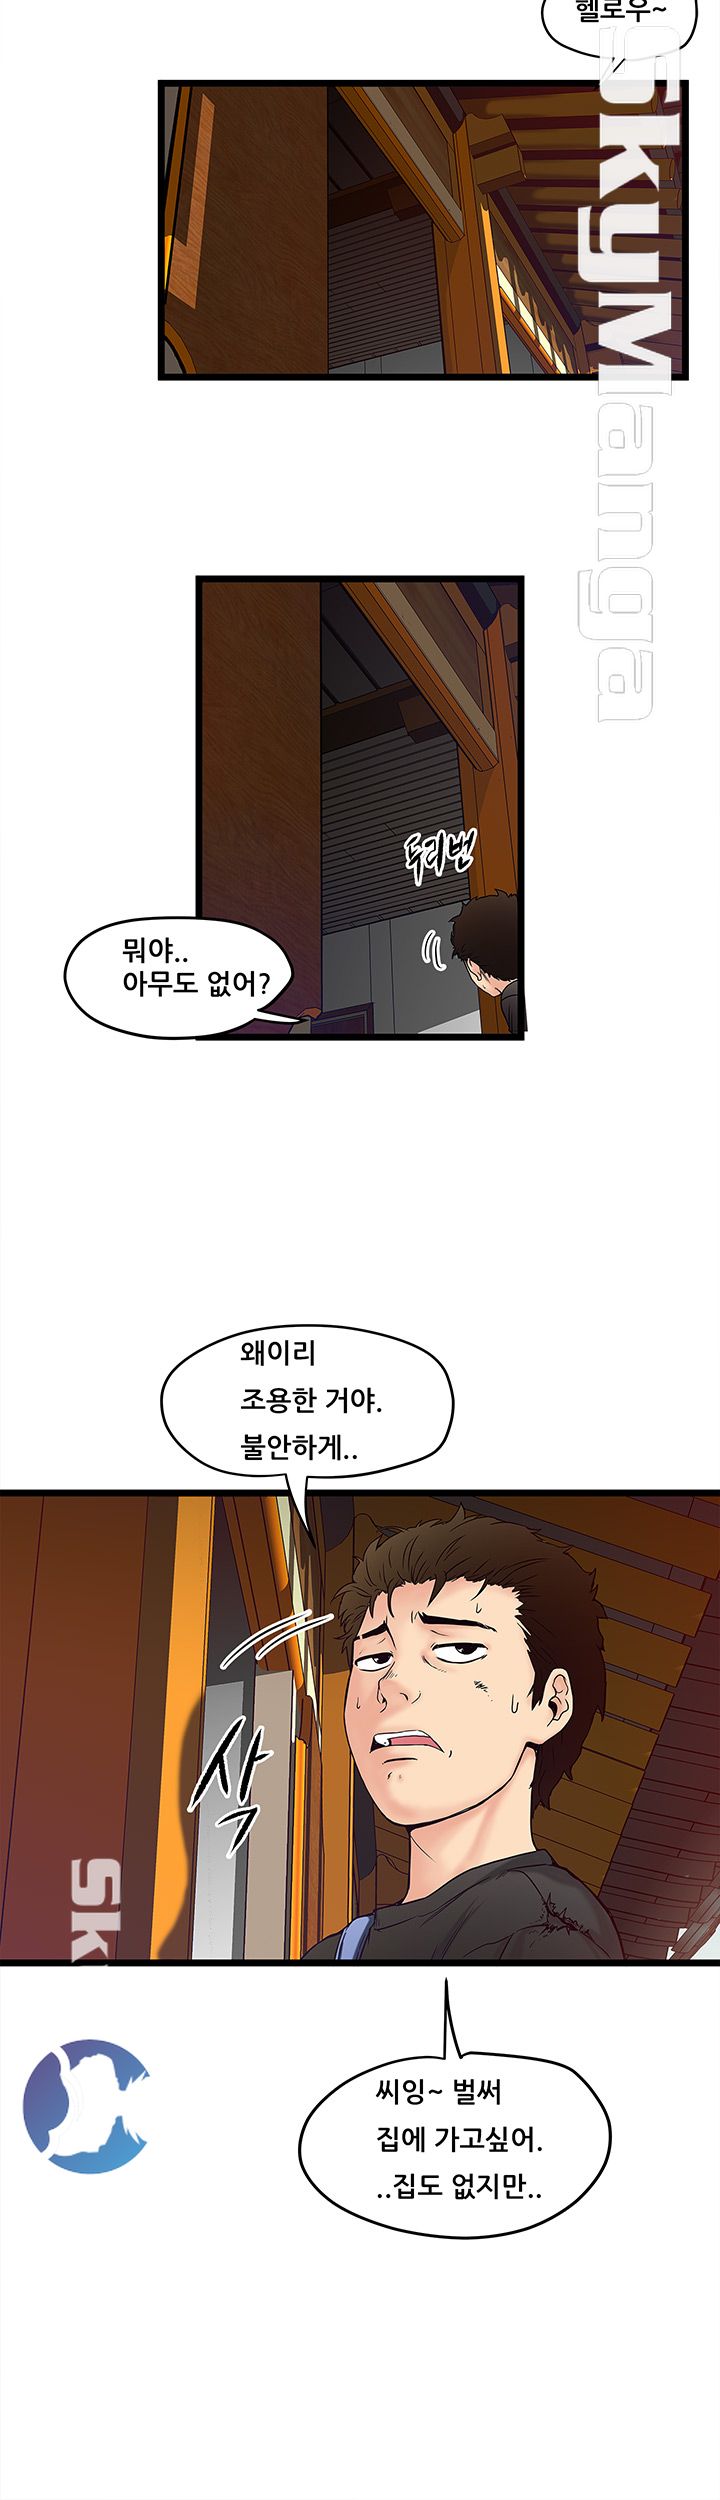 Safe House Raw - Chapter 1 Page 4